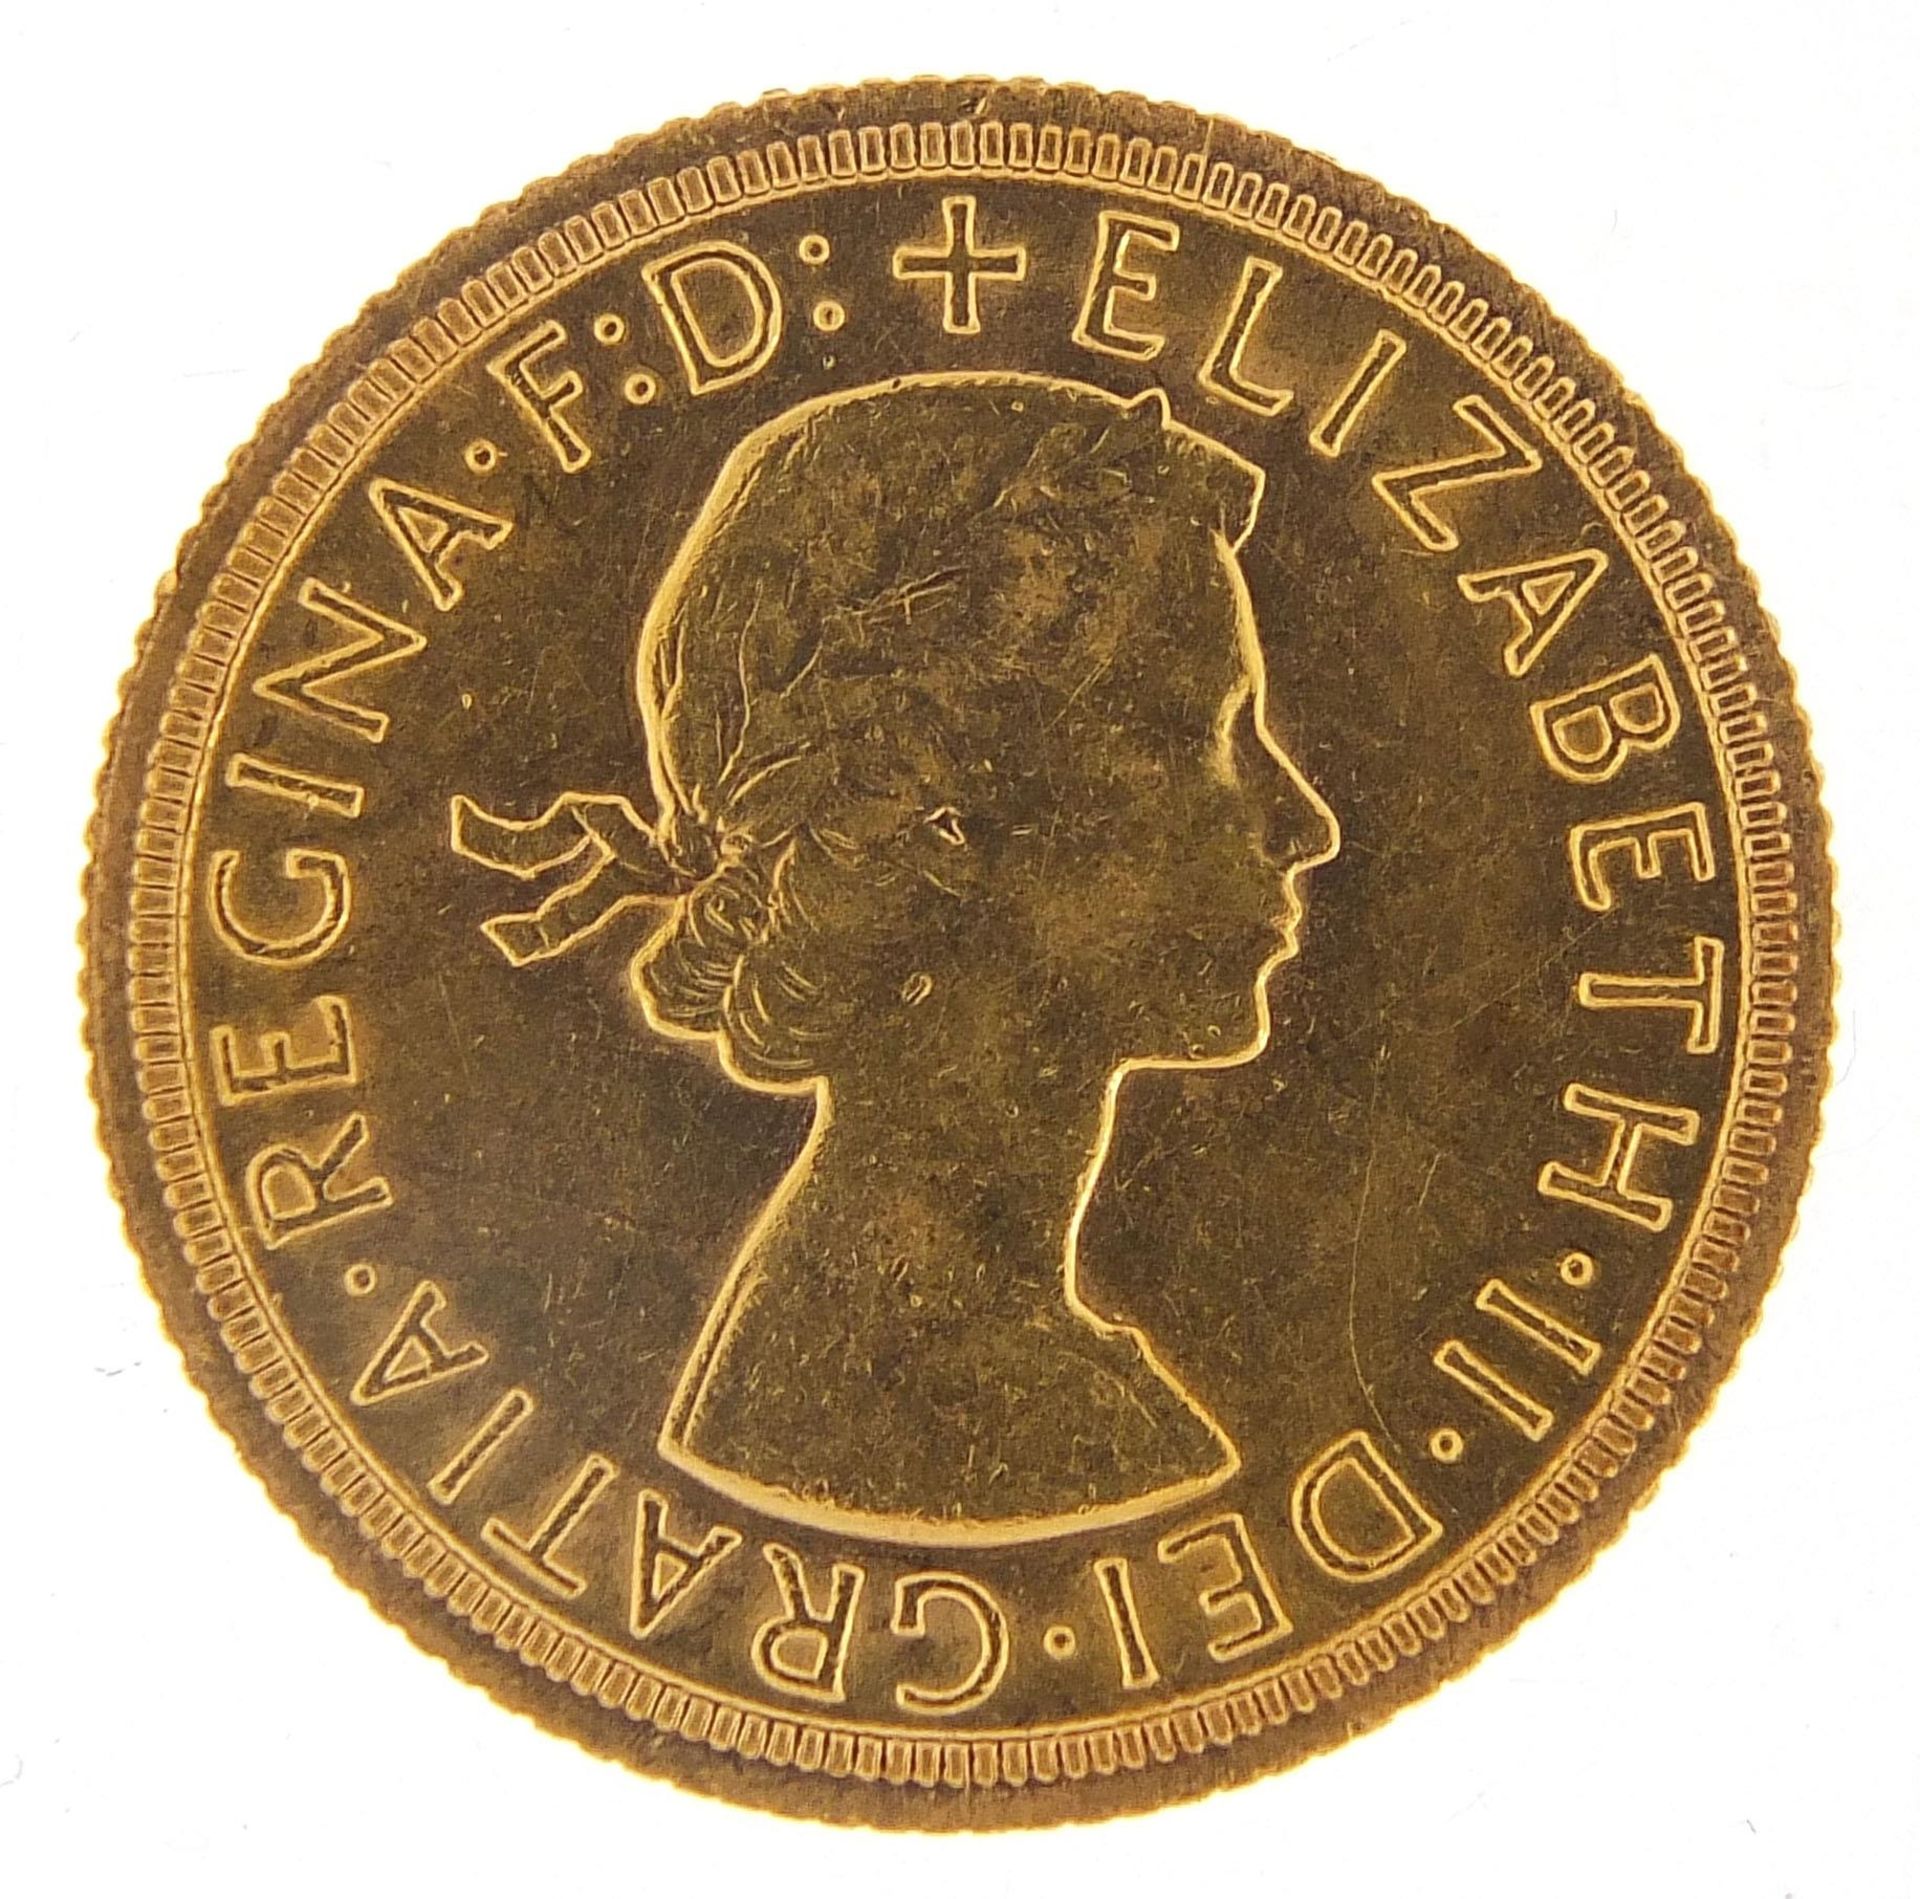 Elizabeth II 1966 gold sovereign - this lot is sold without buyer's premium - Image 2 of 3